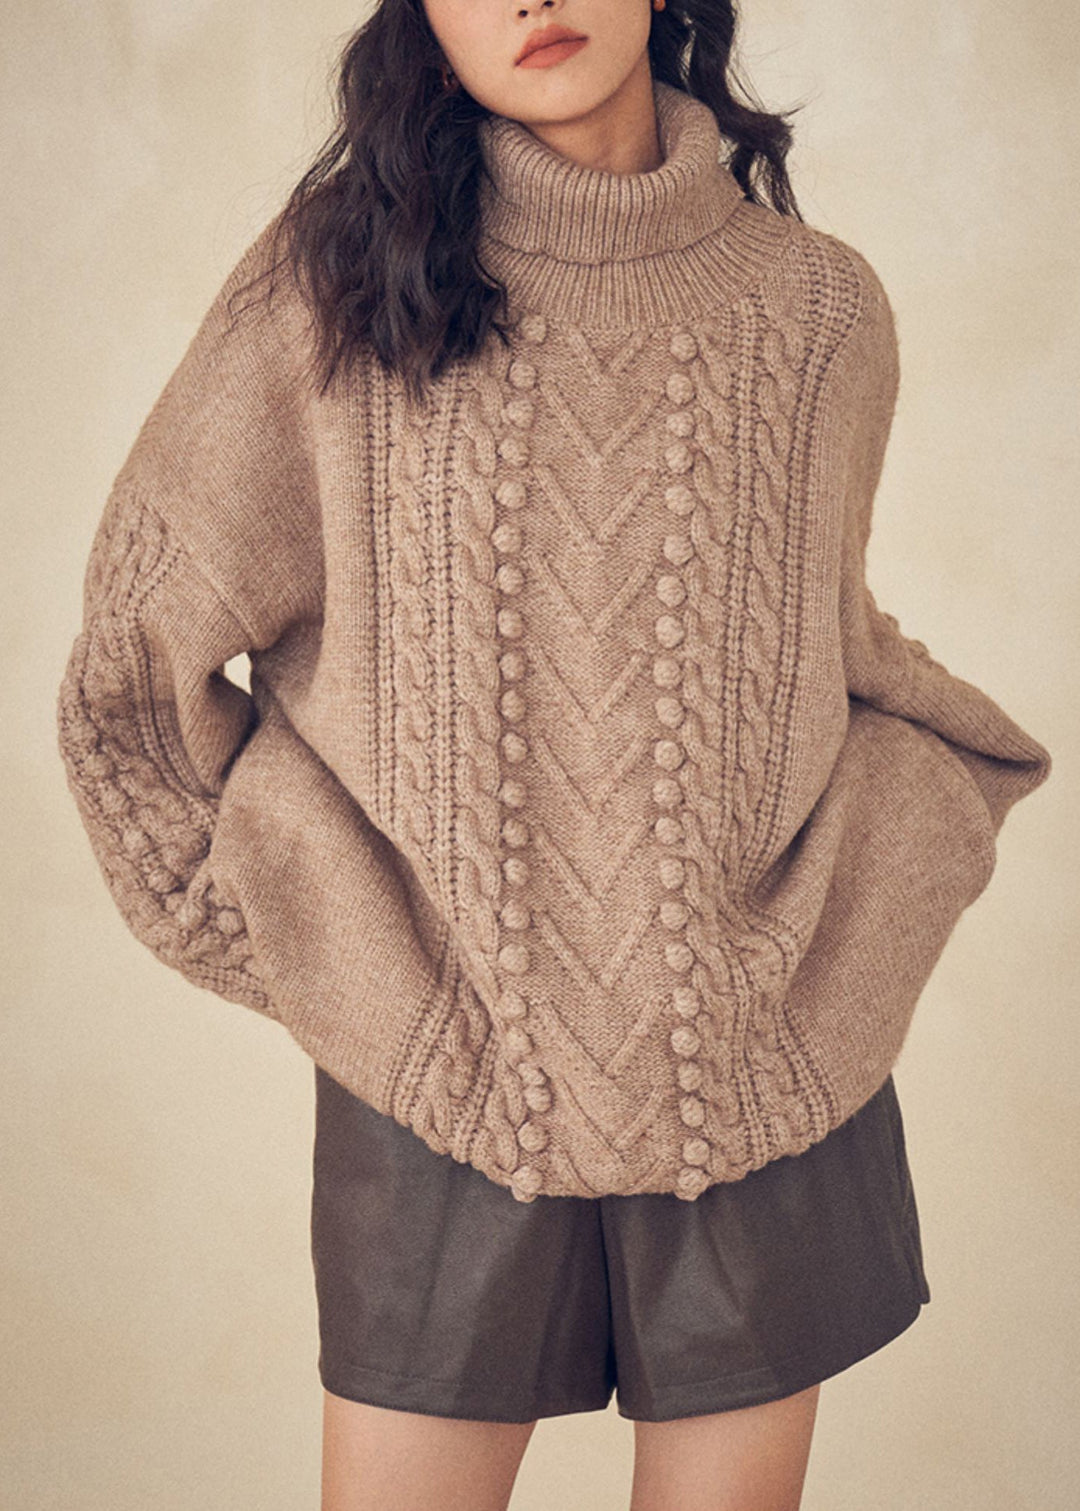 Women Caramel Turtleneck Patchwork Cable Knit Sweaters Top Fall